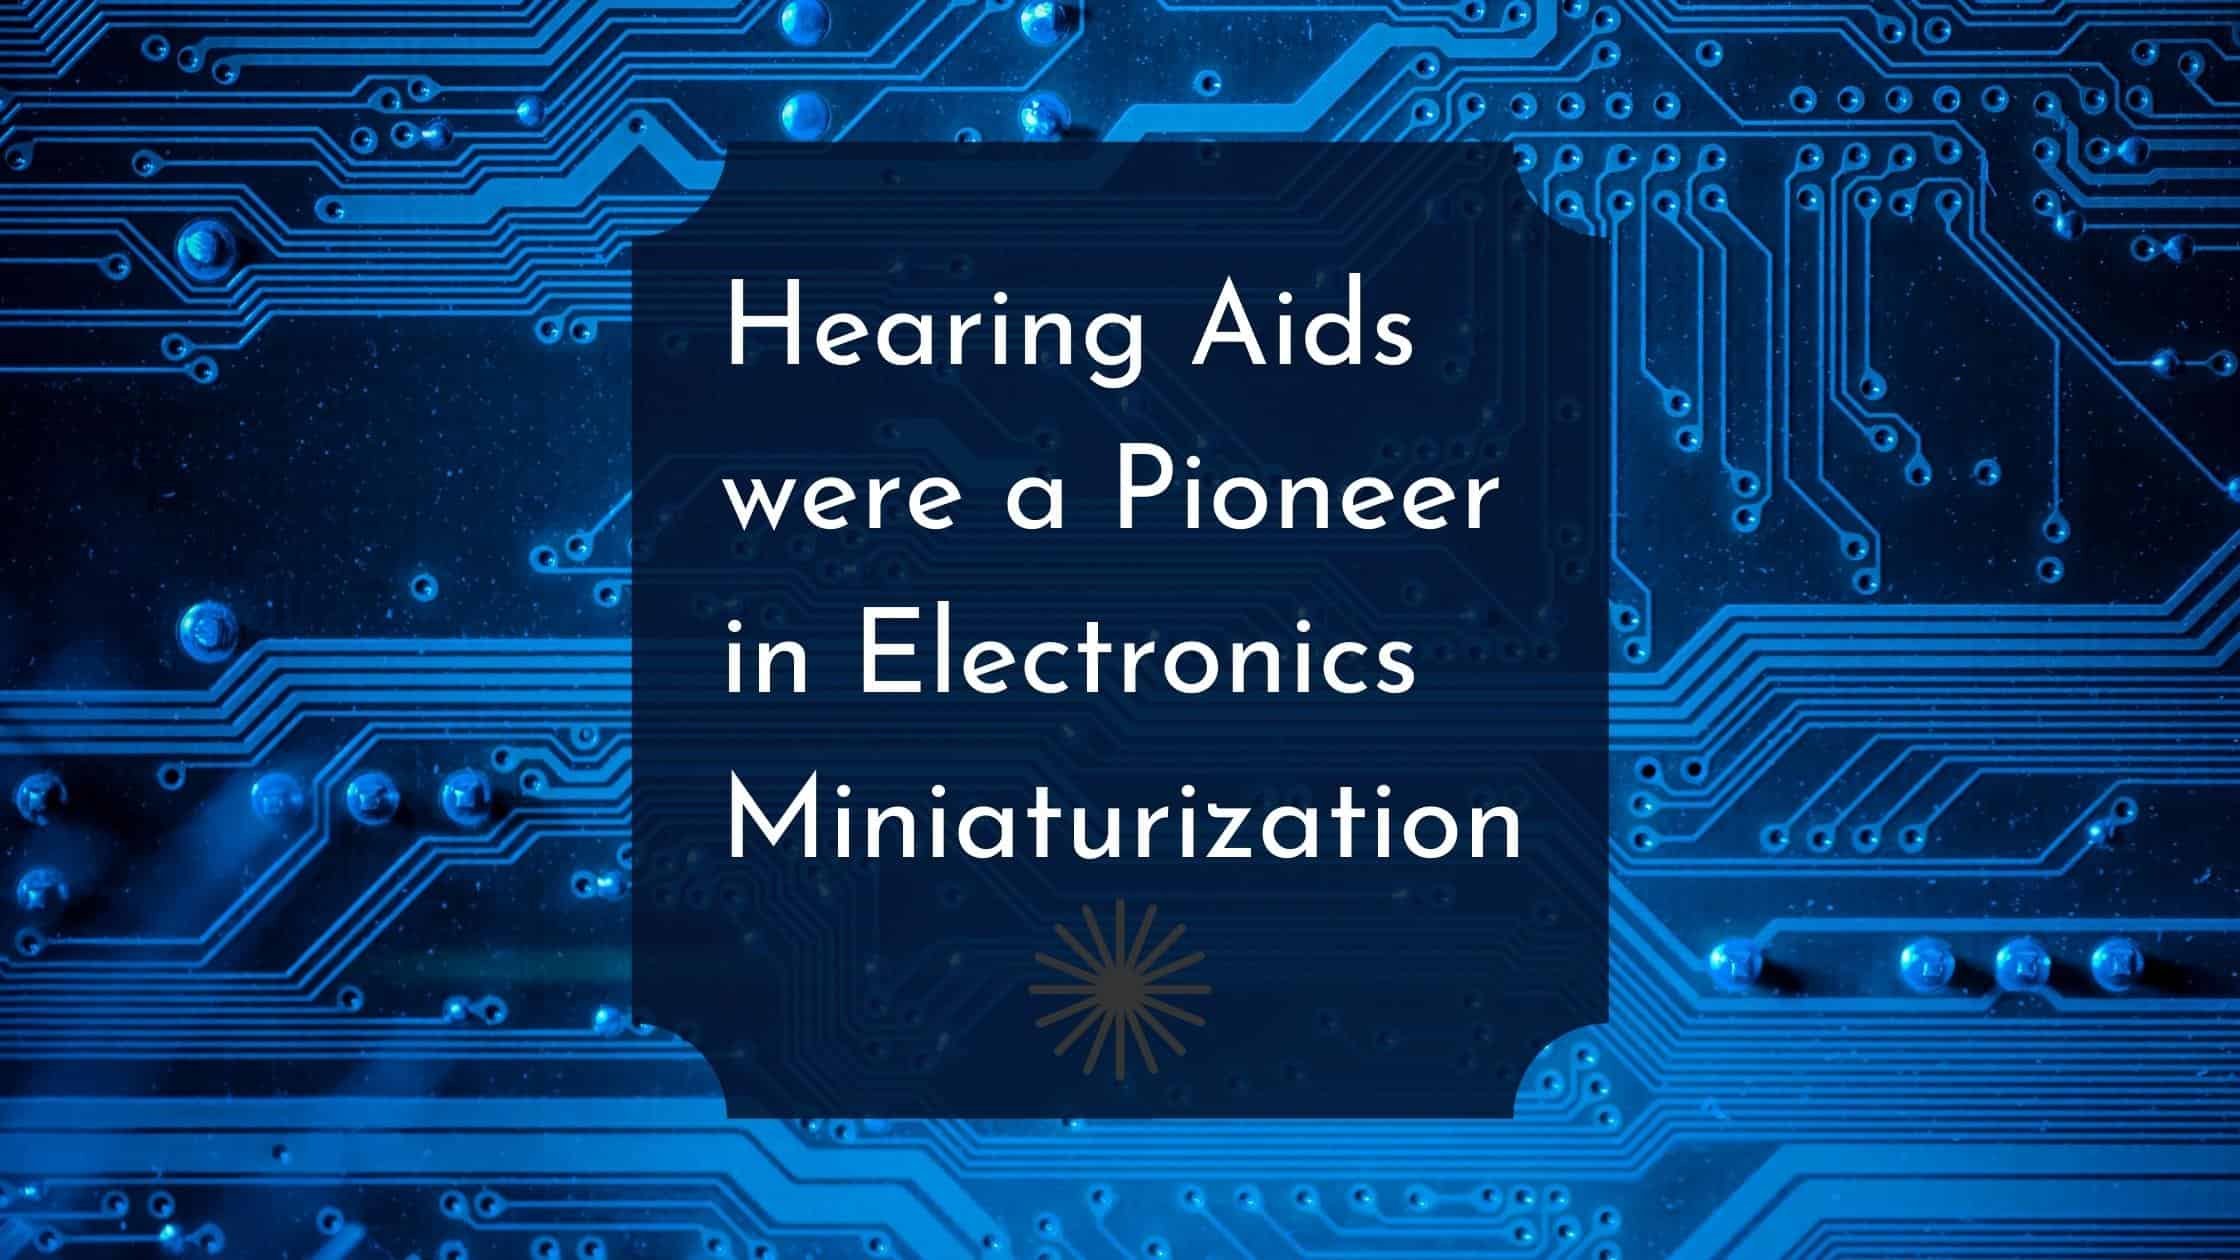 Featured image for “Hearing Aids were a Pioneer in Electronics Miniaturization”